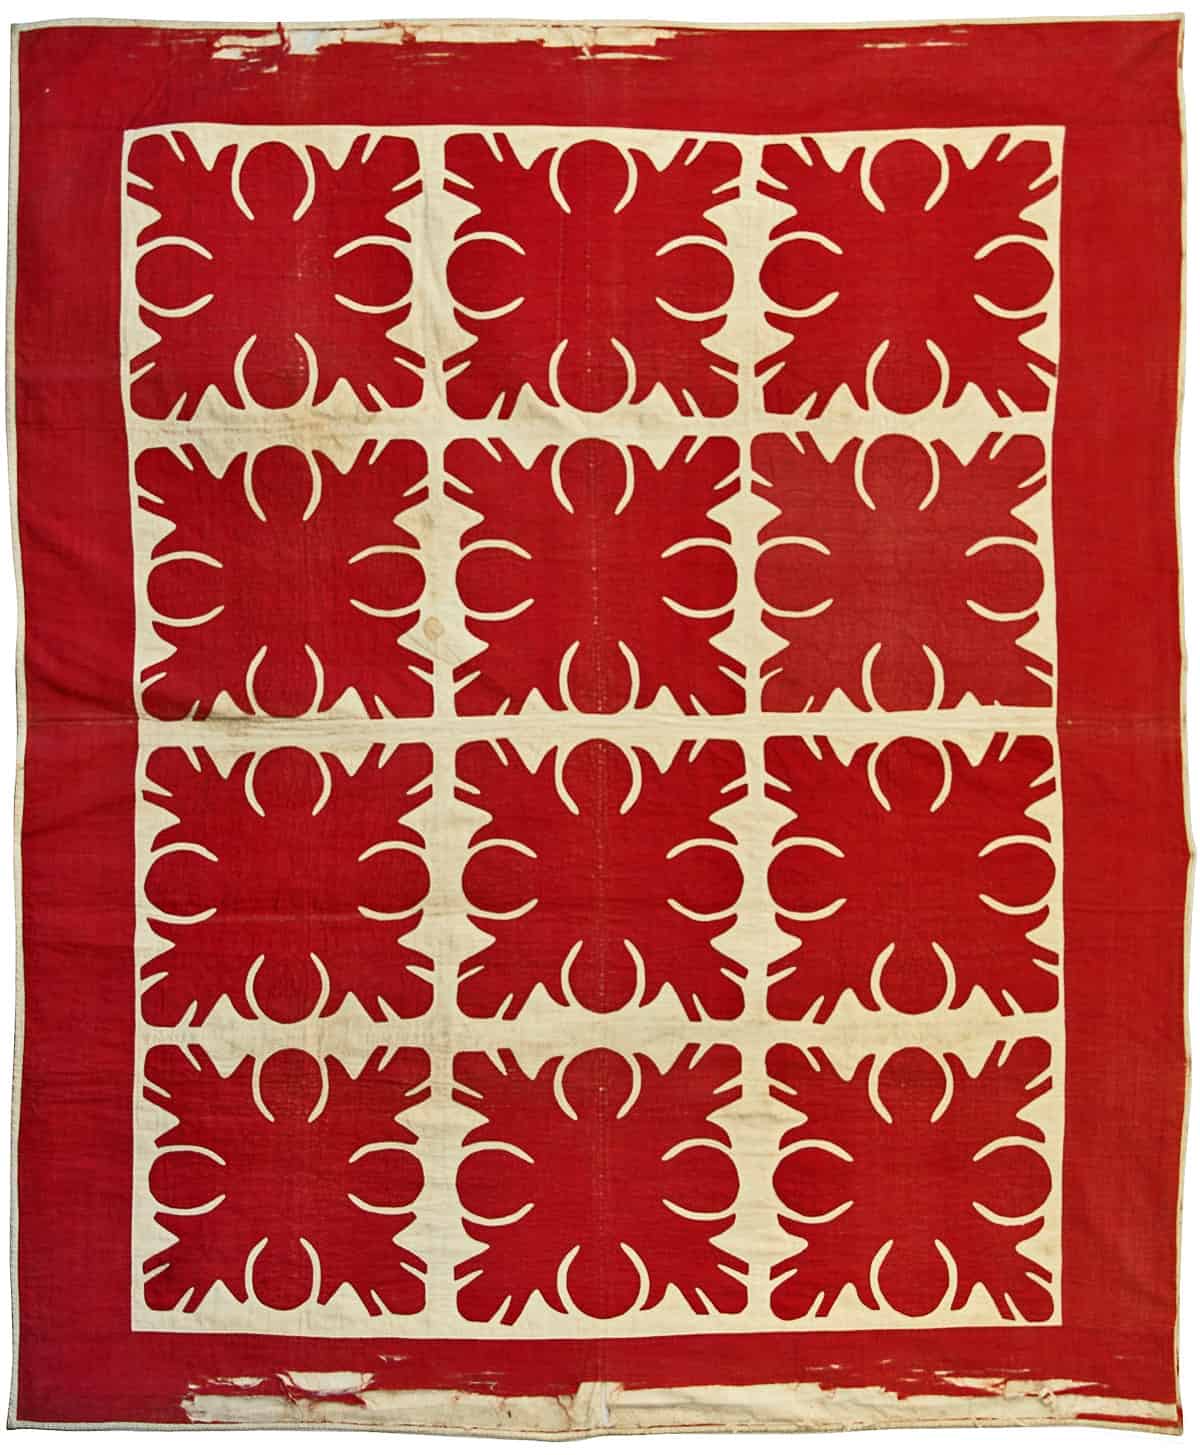 Oak Leaf Variation Quilt in Red And White | Unknown Maker, Circa 1875 | Cotton 84″ x 68″ | Rowayton Historical Society 71.26.3